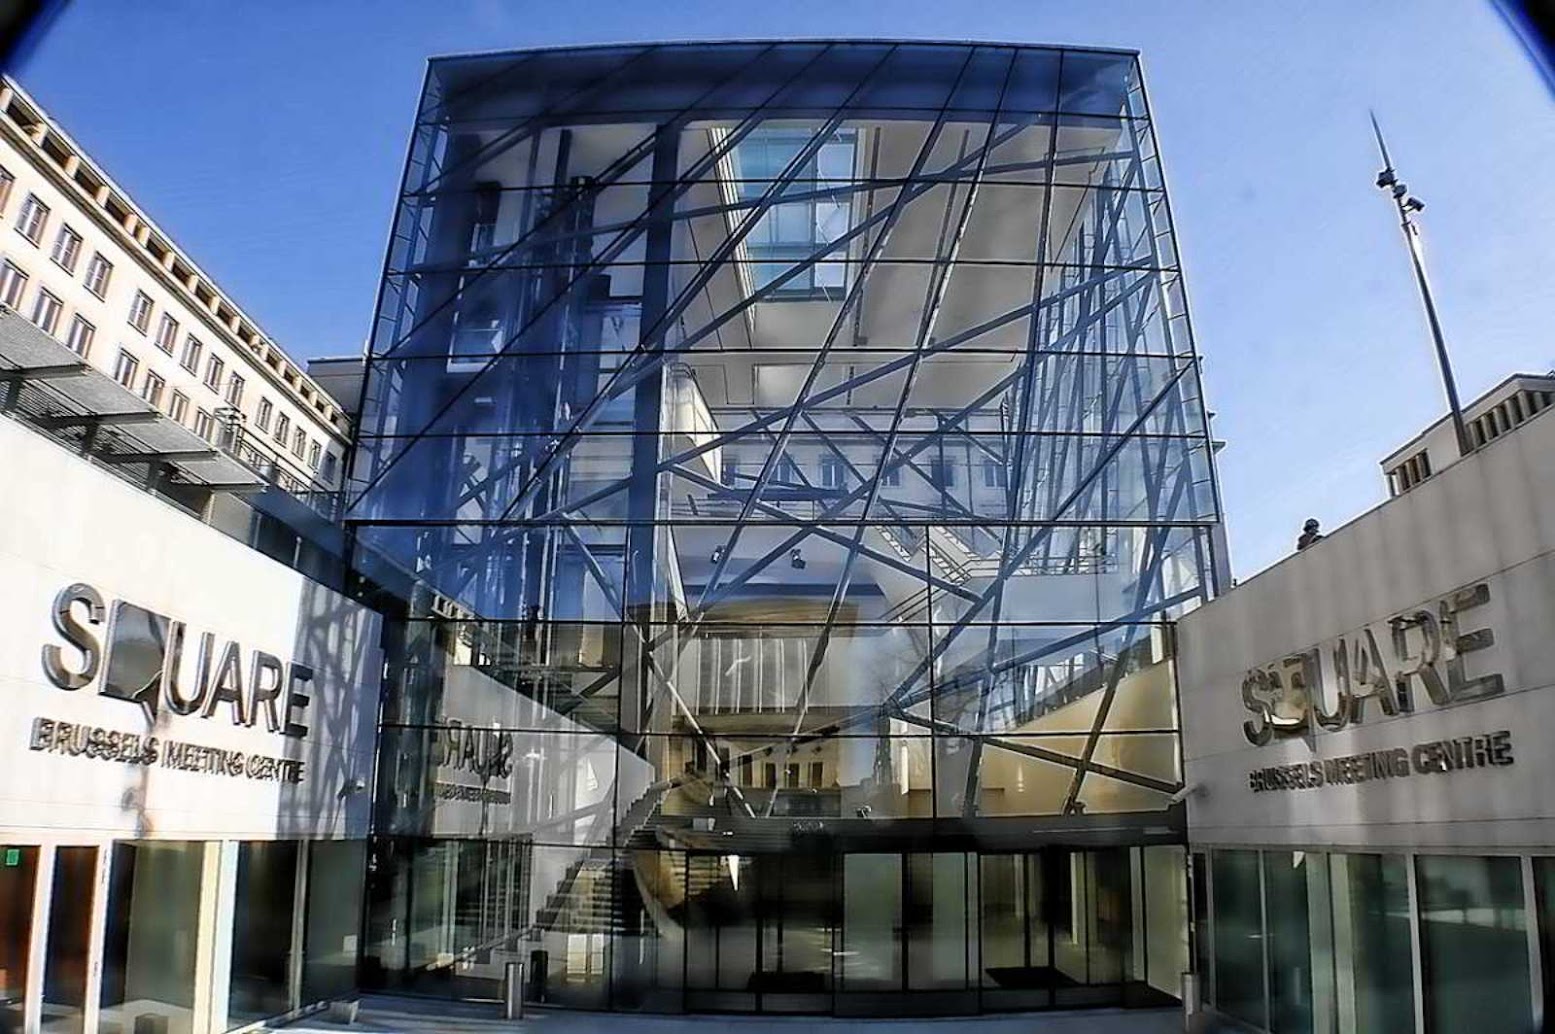 Città di Bruxelles, Belgio: [SQUARE BRUSSELS MEETING CENTER BY A2RC ARCHITECTS]